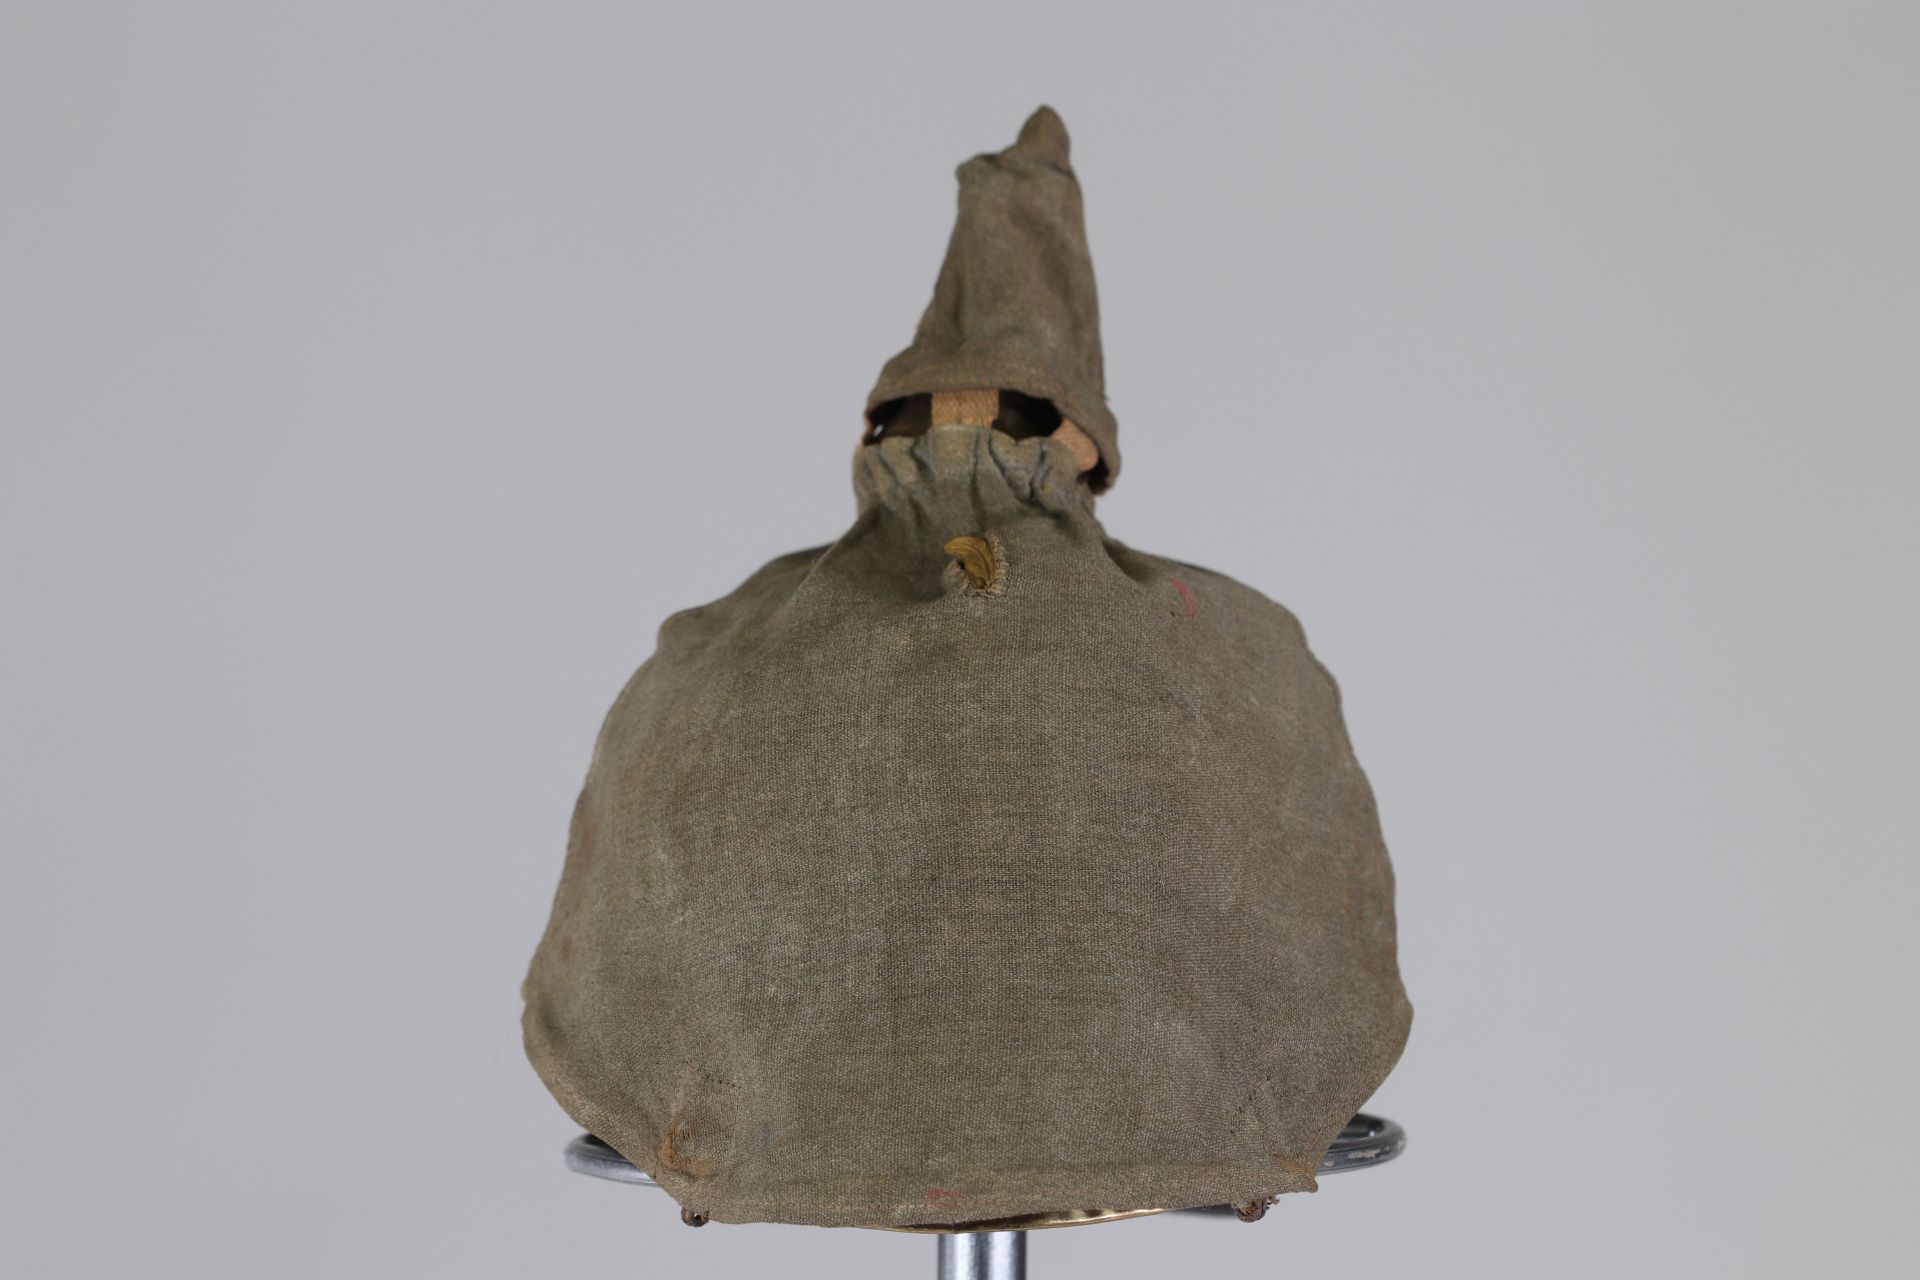 German 14-18 infantry helmet with protective cover